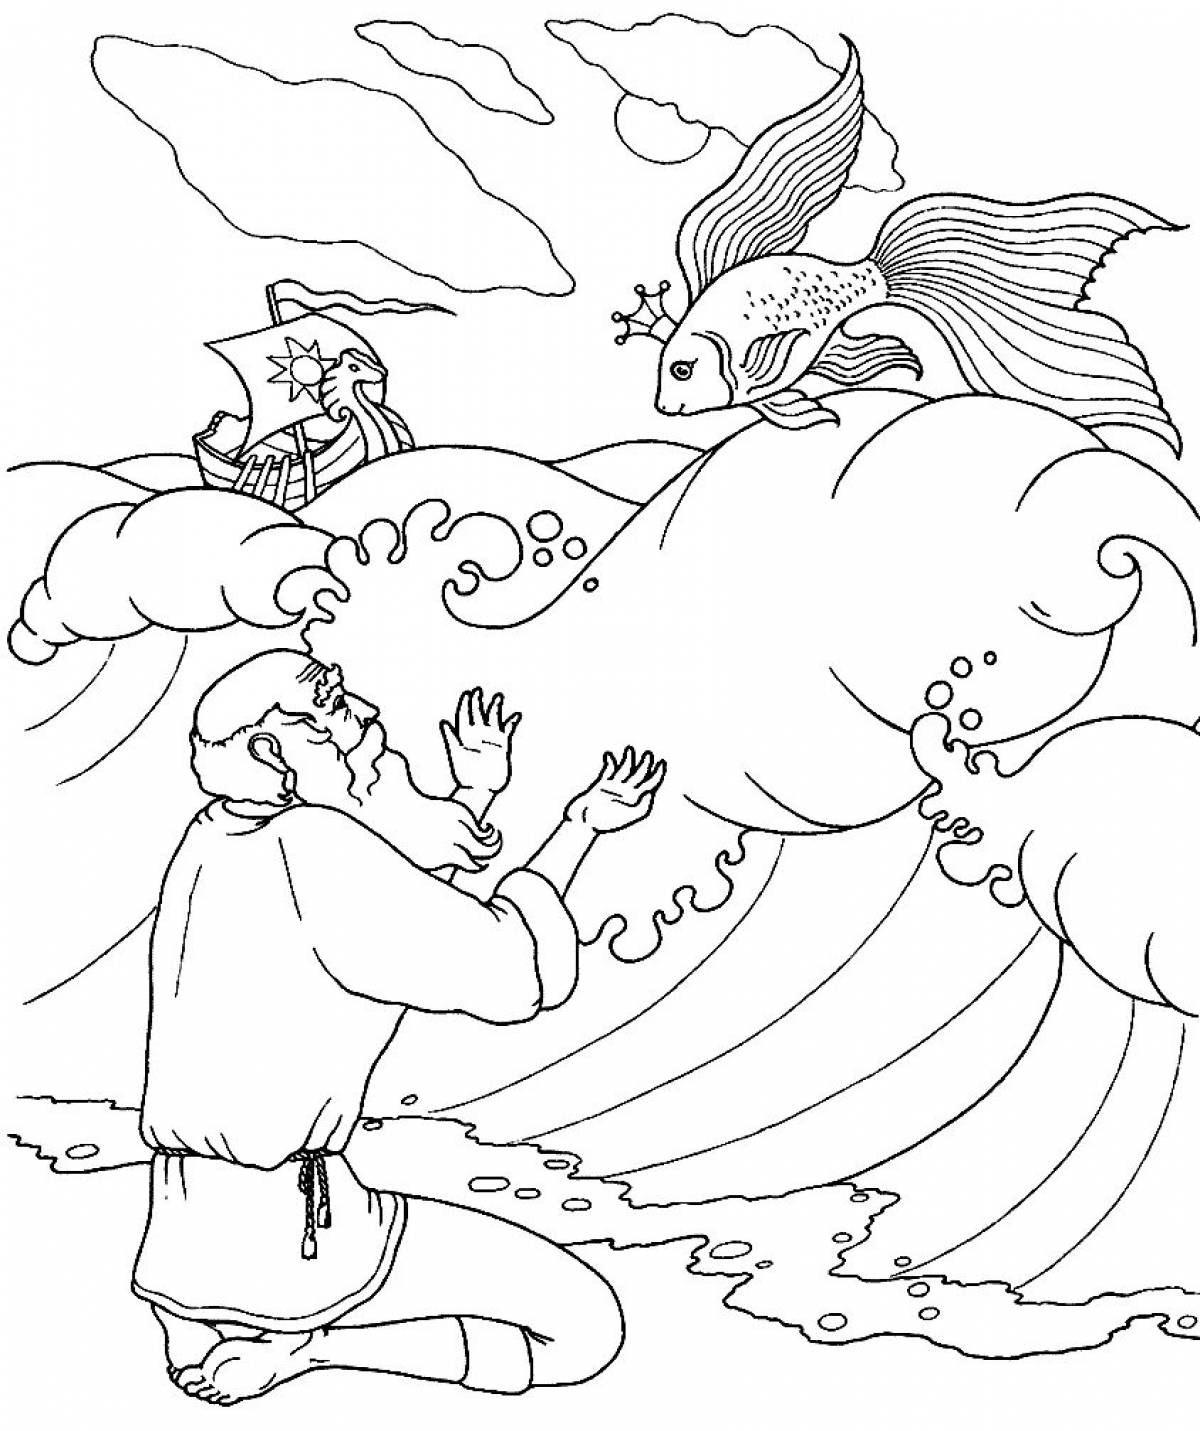 Live coloring according to the tale of the fisherman and the fish drawing